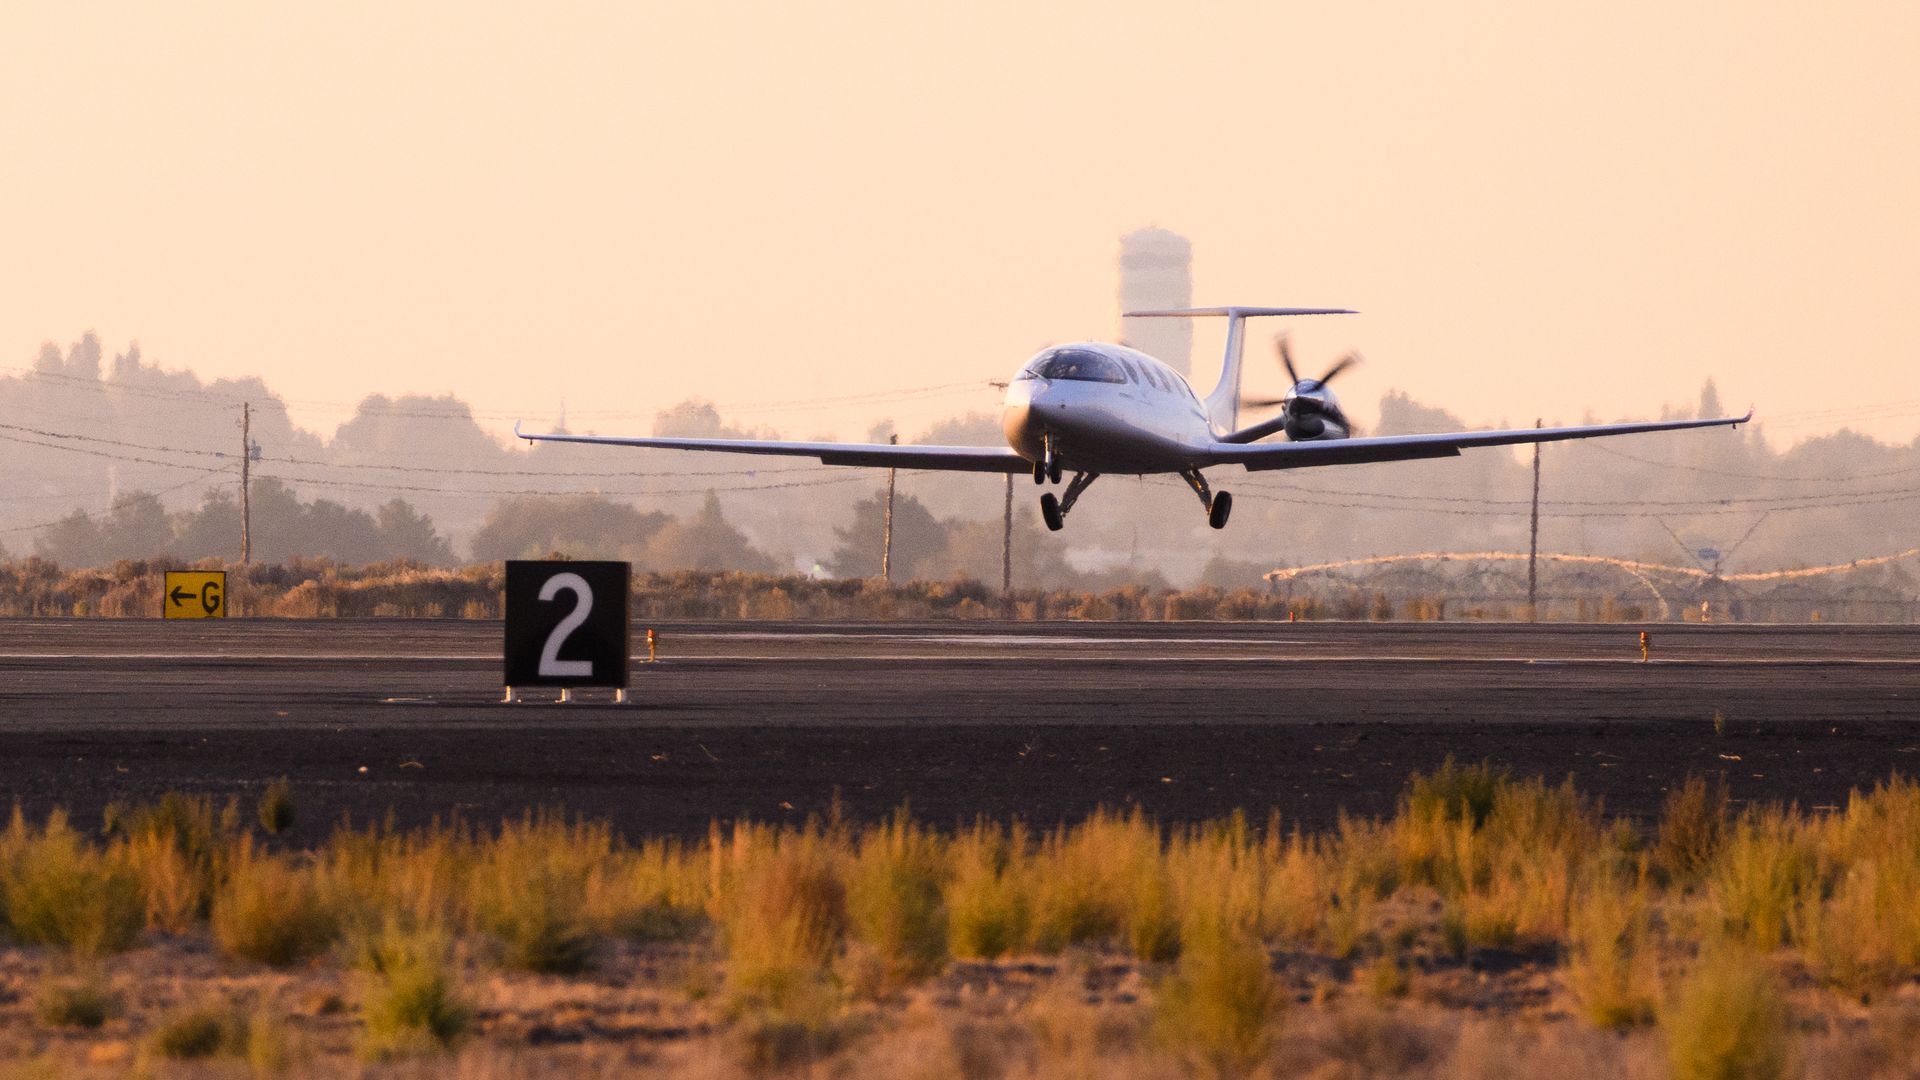 Eviation's "Alice", the world's first all-electric commuter airplane, lands at the conclusion of its first flight on September 27, 2022 in Moses Lake, Washington.